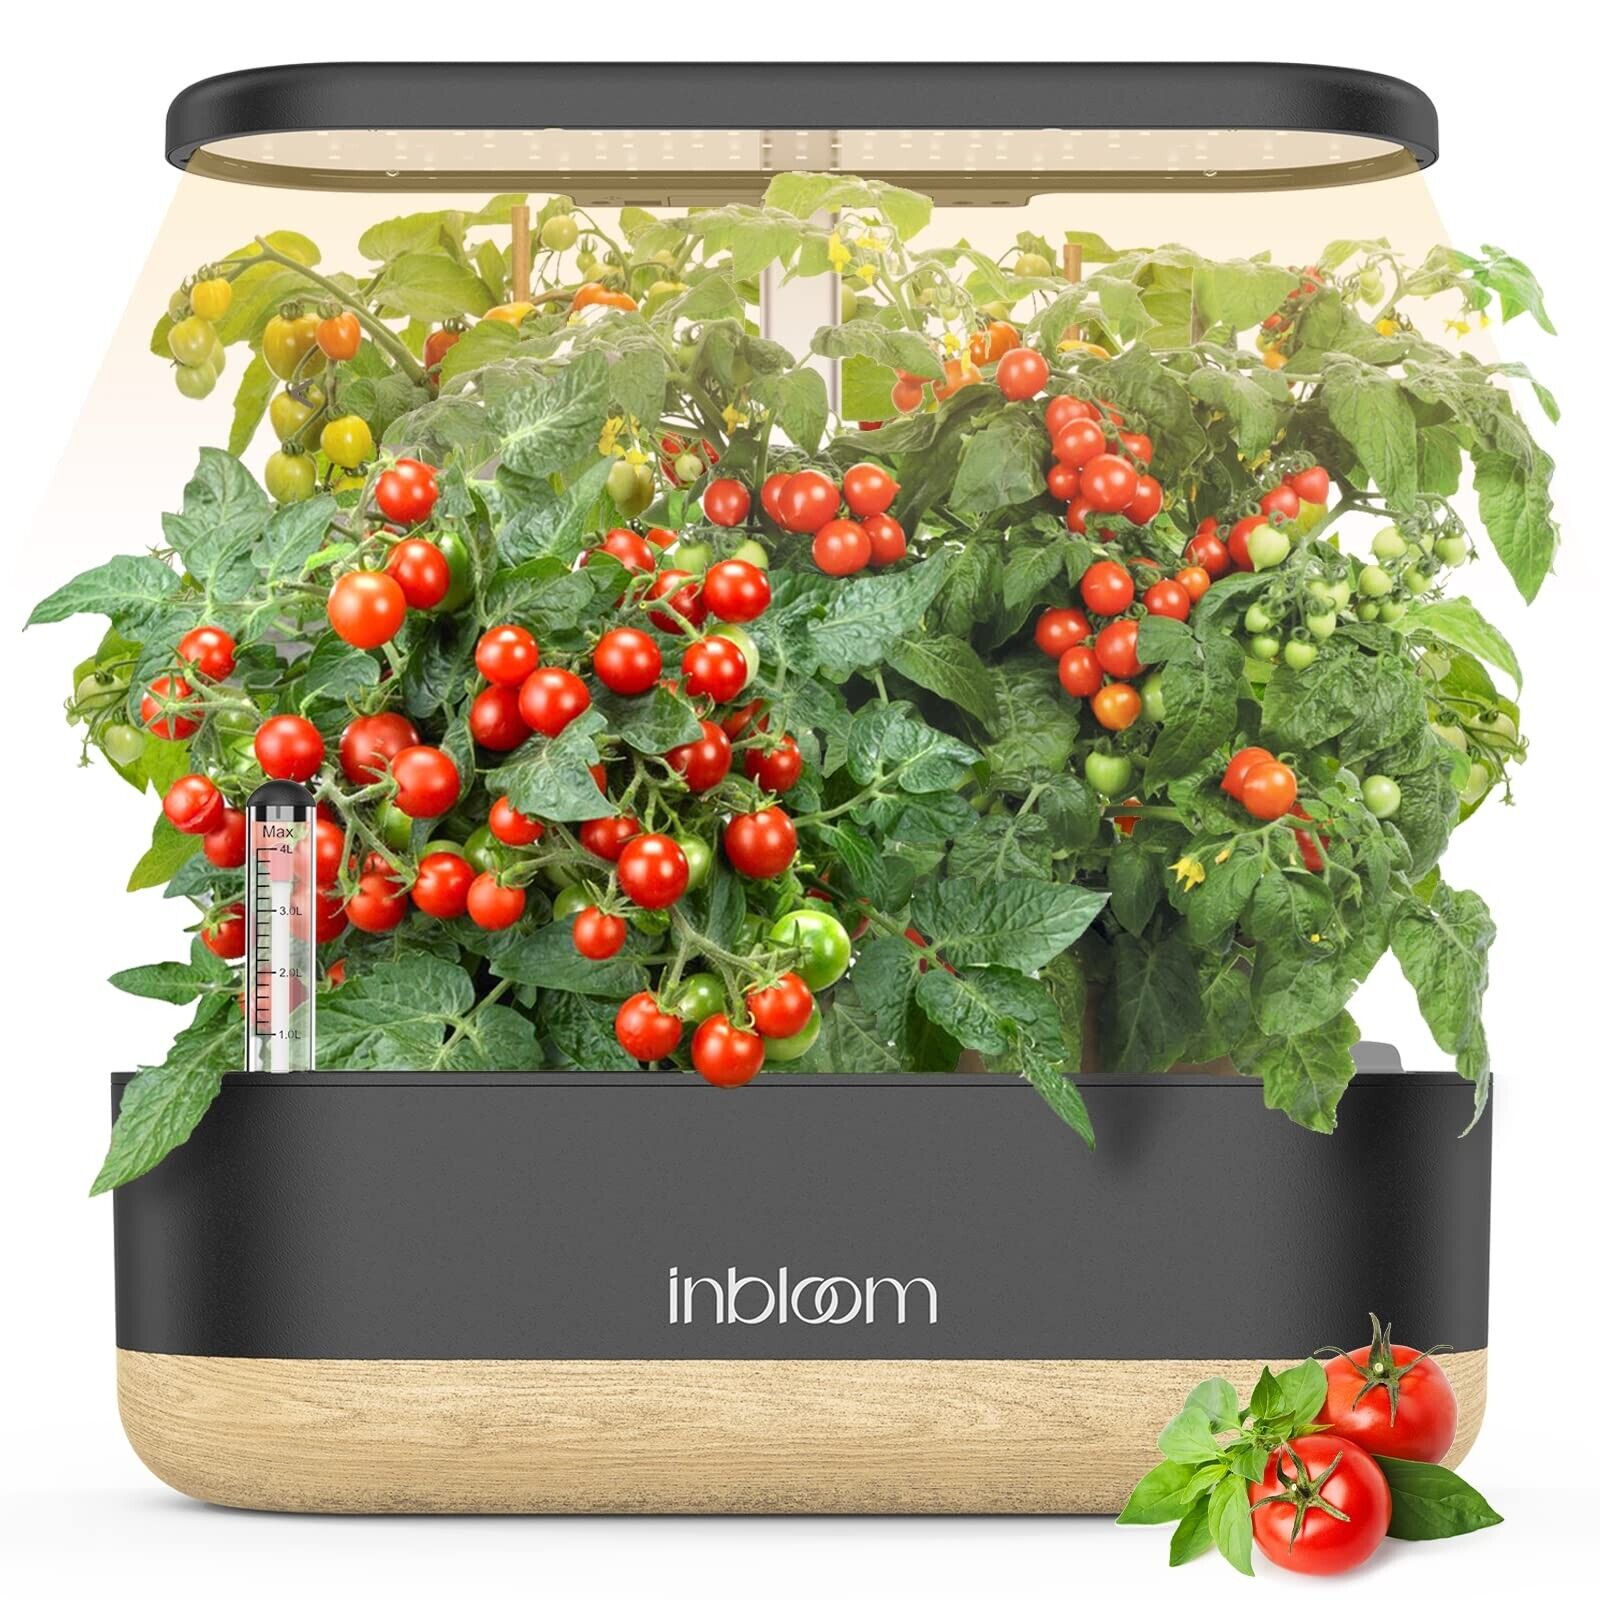 inbloom Hydroponics Growing System 10 Pods, Indoor Herb Garden with LEDs Full...